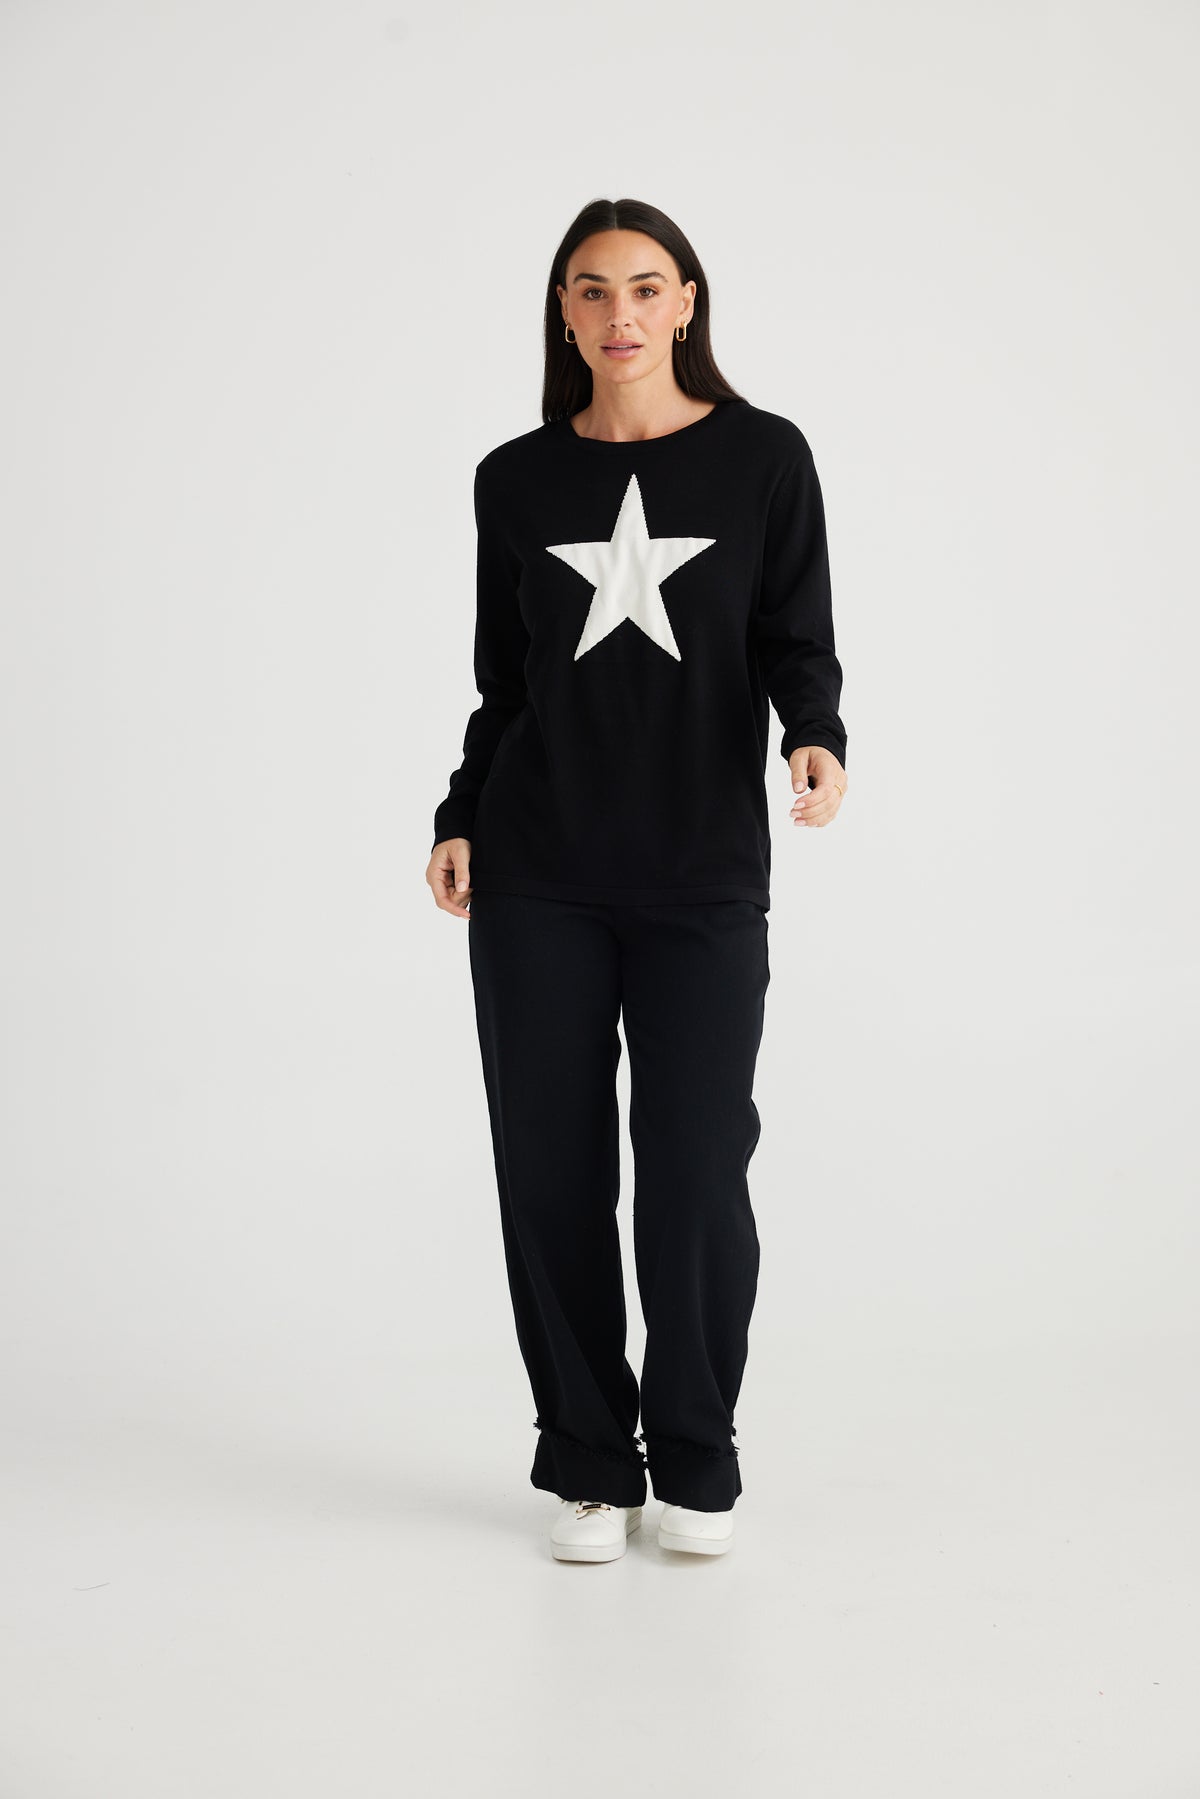 Petra Star Knit Black With White